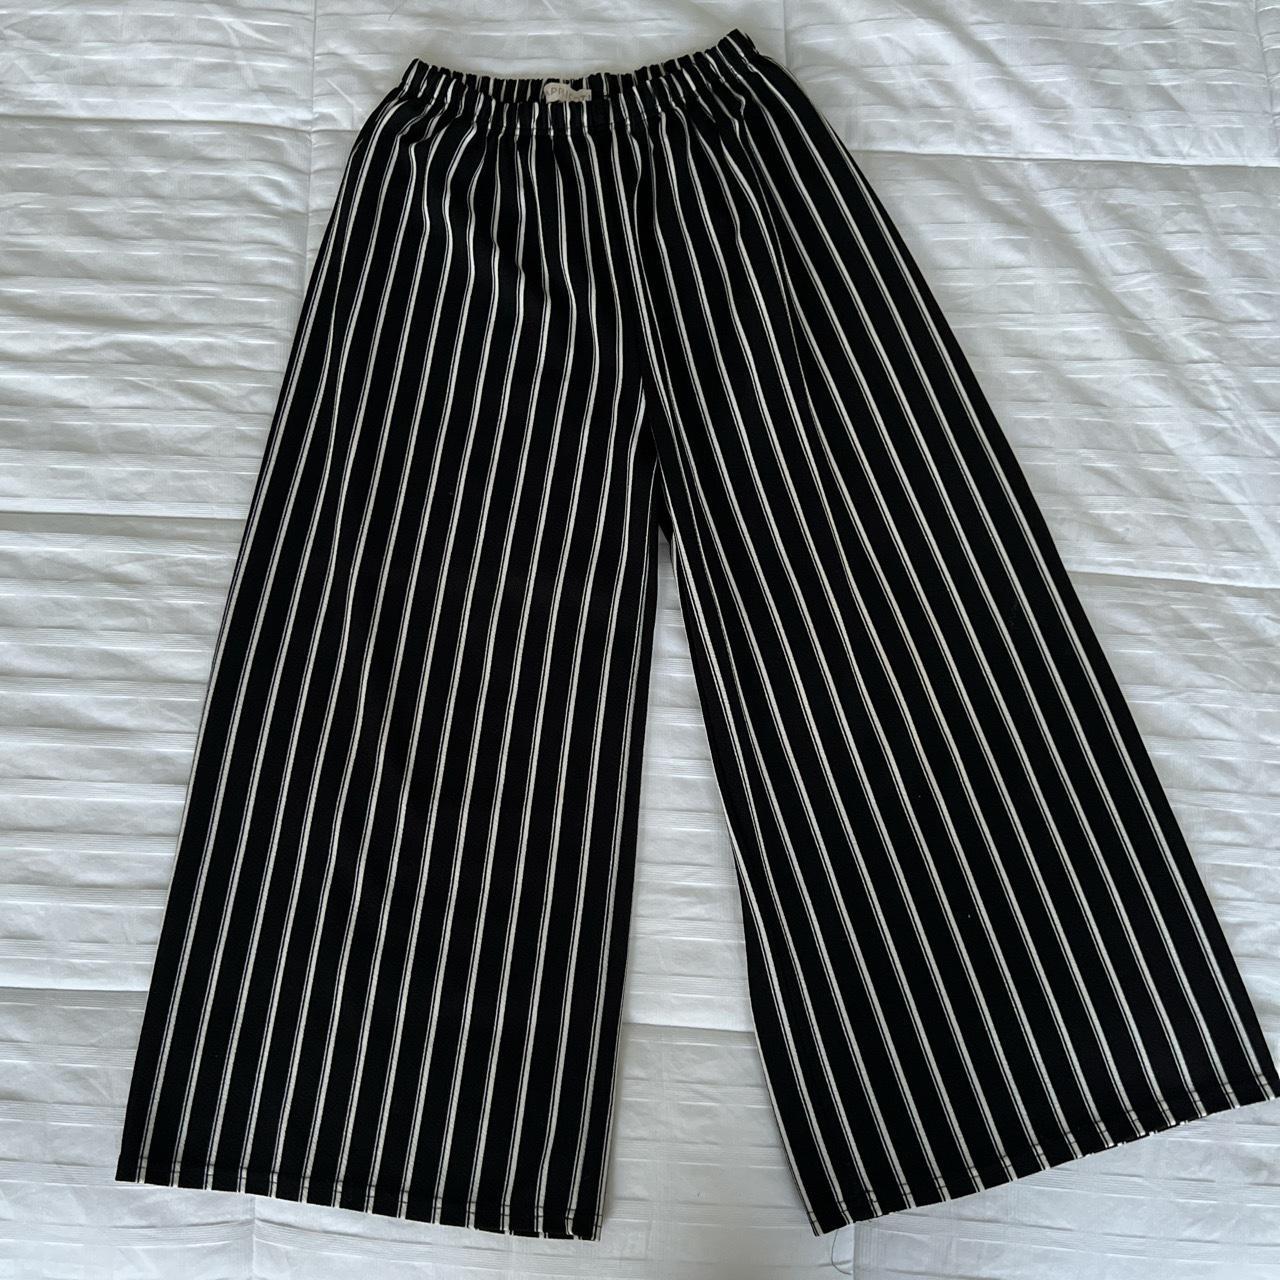 Product Image 2 - Apricot Black and White Striped